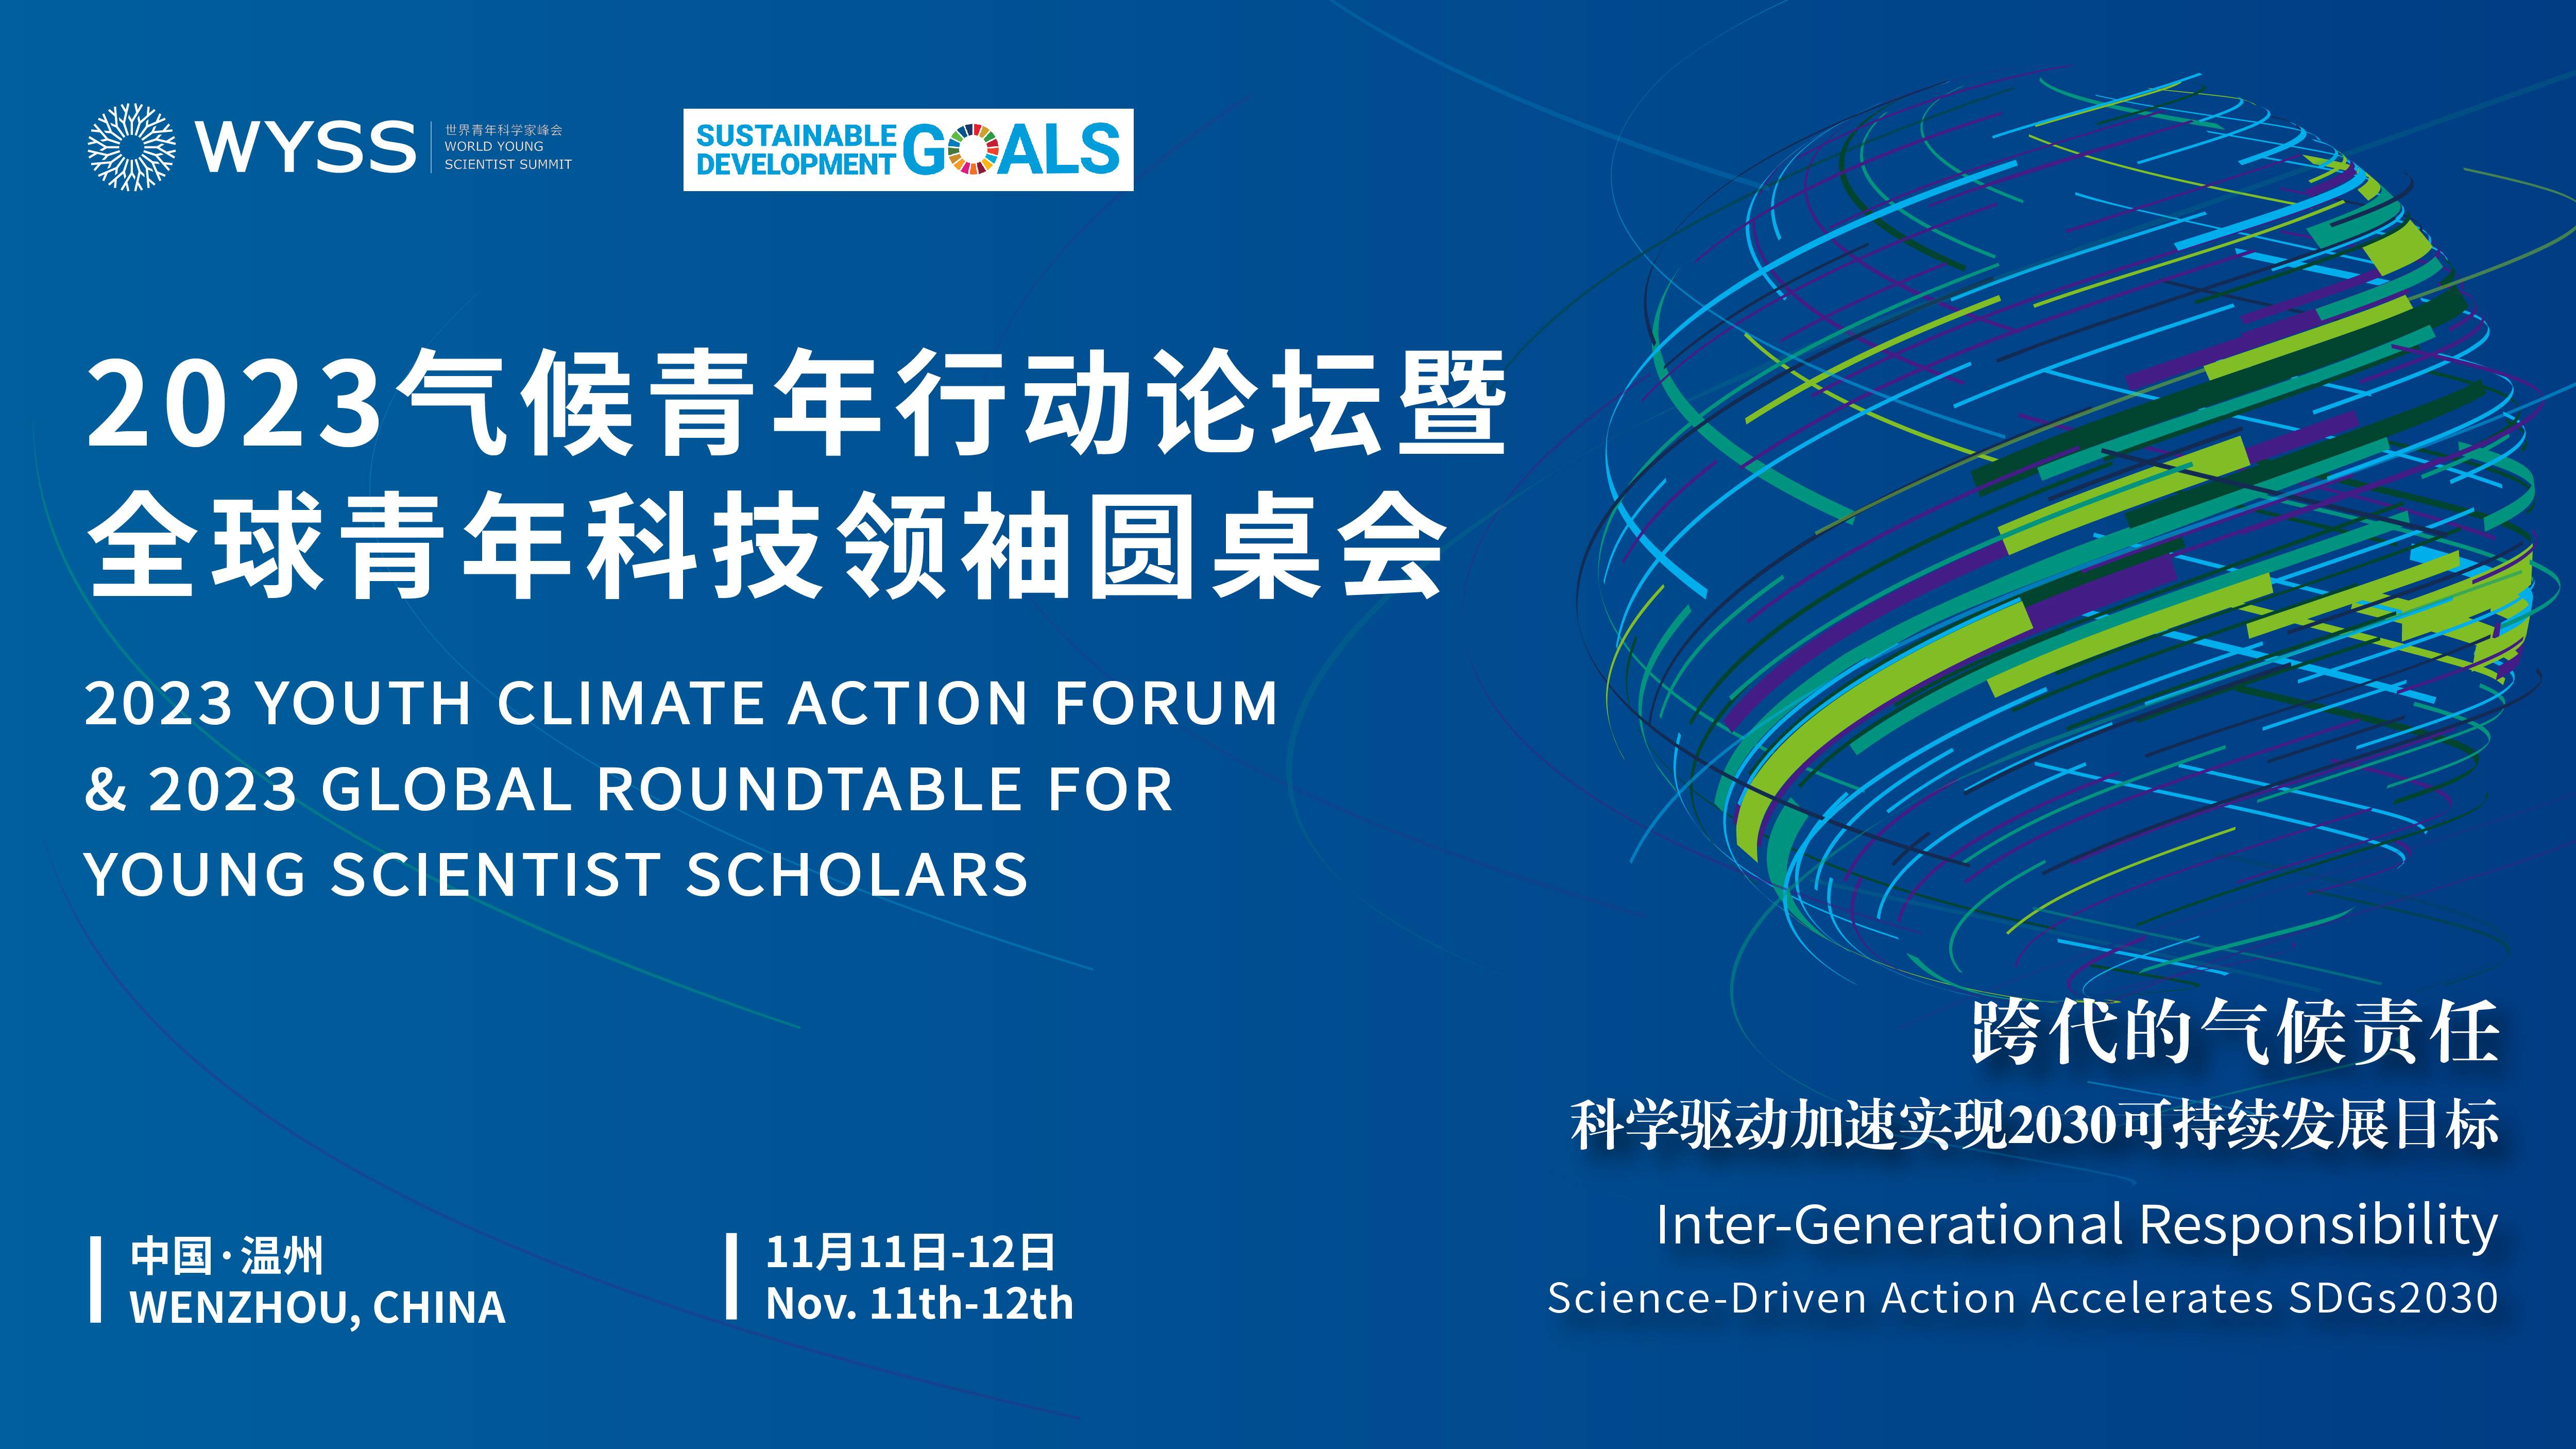 2023 Youth Climate Action Forum  & 2023 Global Roundtable for Young Scientist Scholars